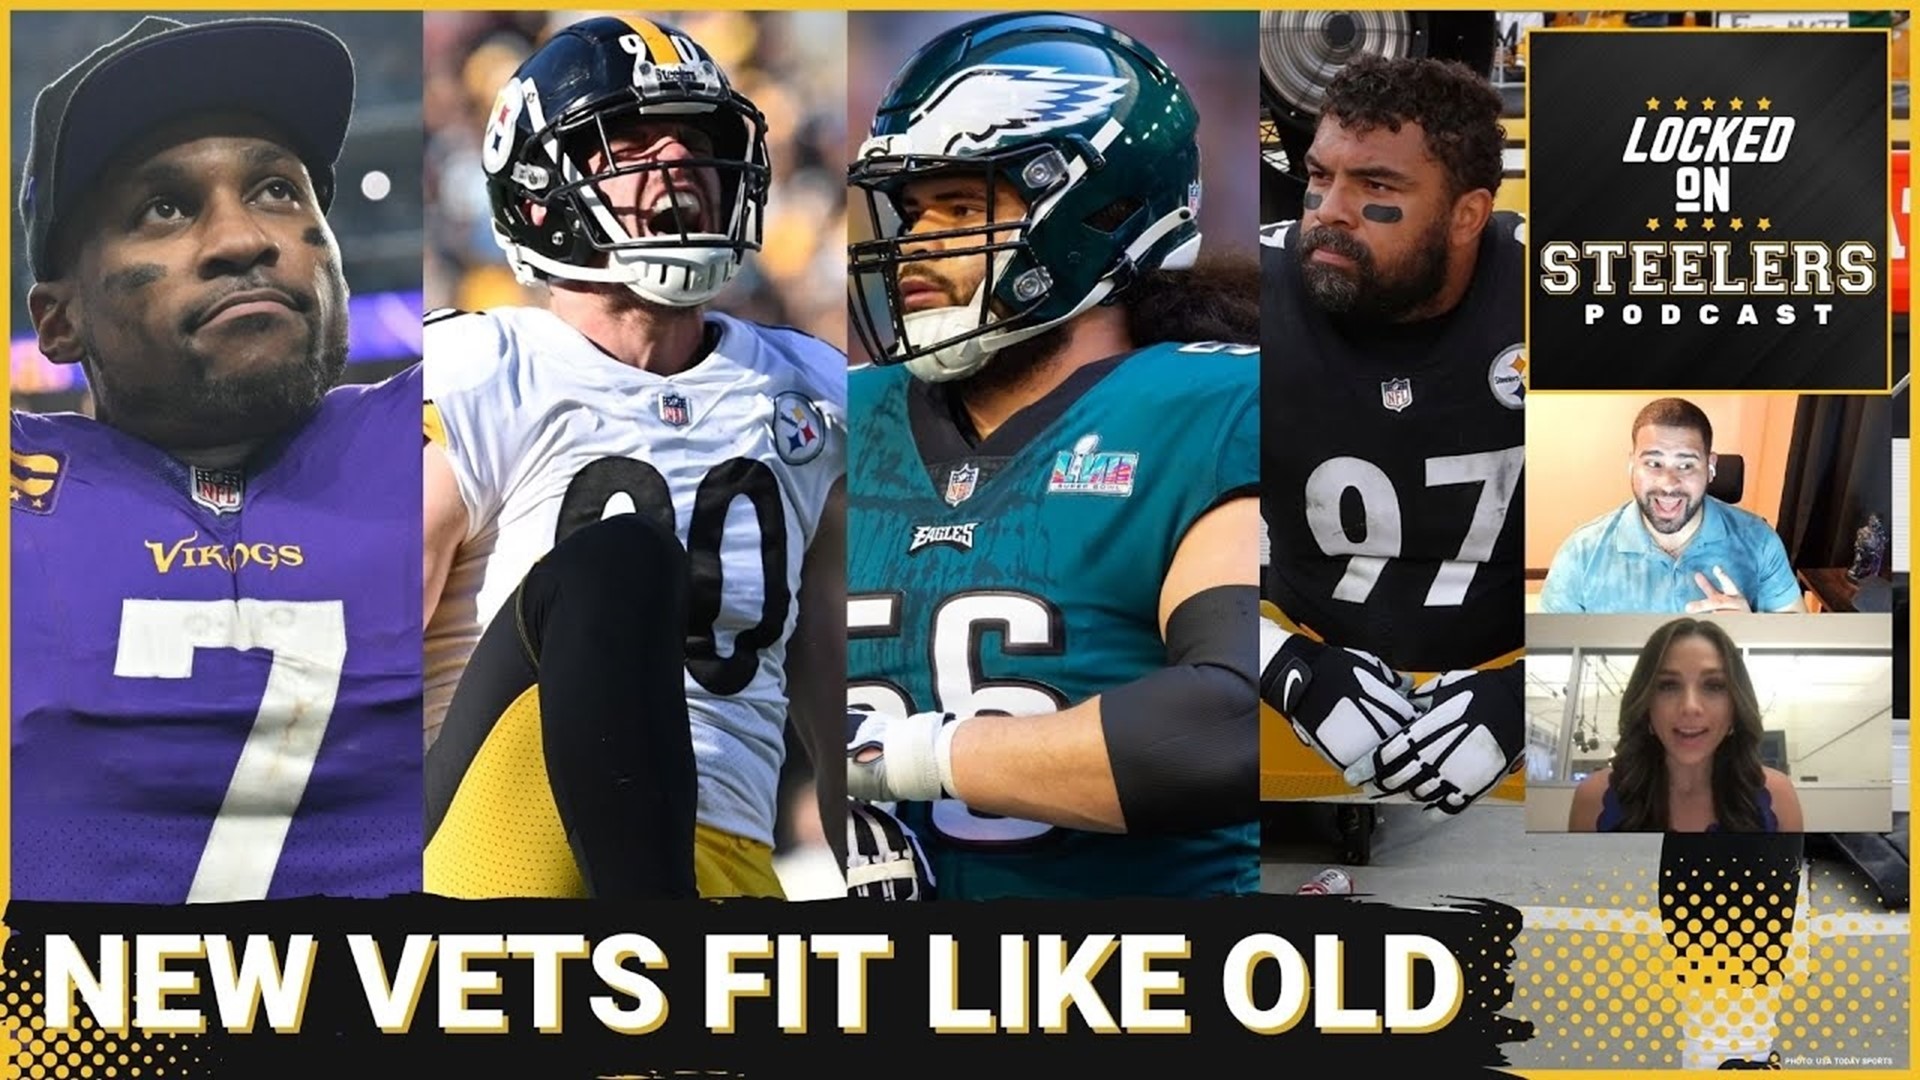 The Pittsburgh Steelers just finished their first week of OTAs, and after talking to veterans like Patrick Peterson, T.J. Watt, Cam Heyward, Isaac Seumalo and others